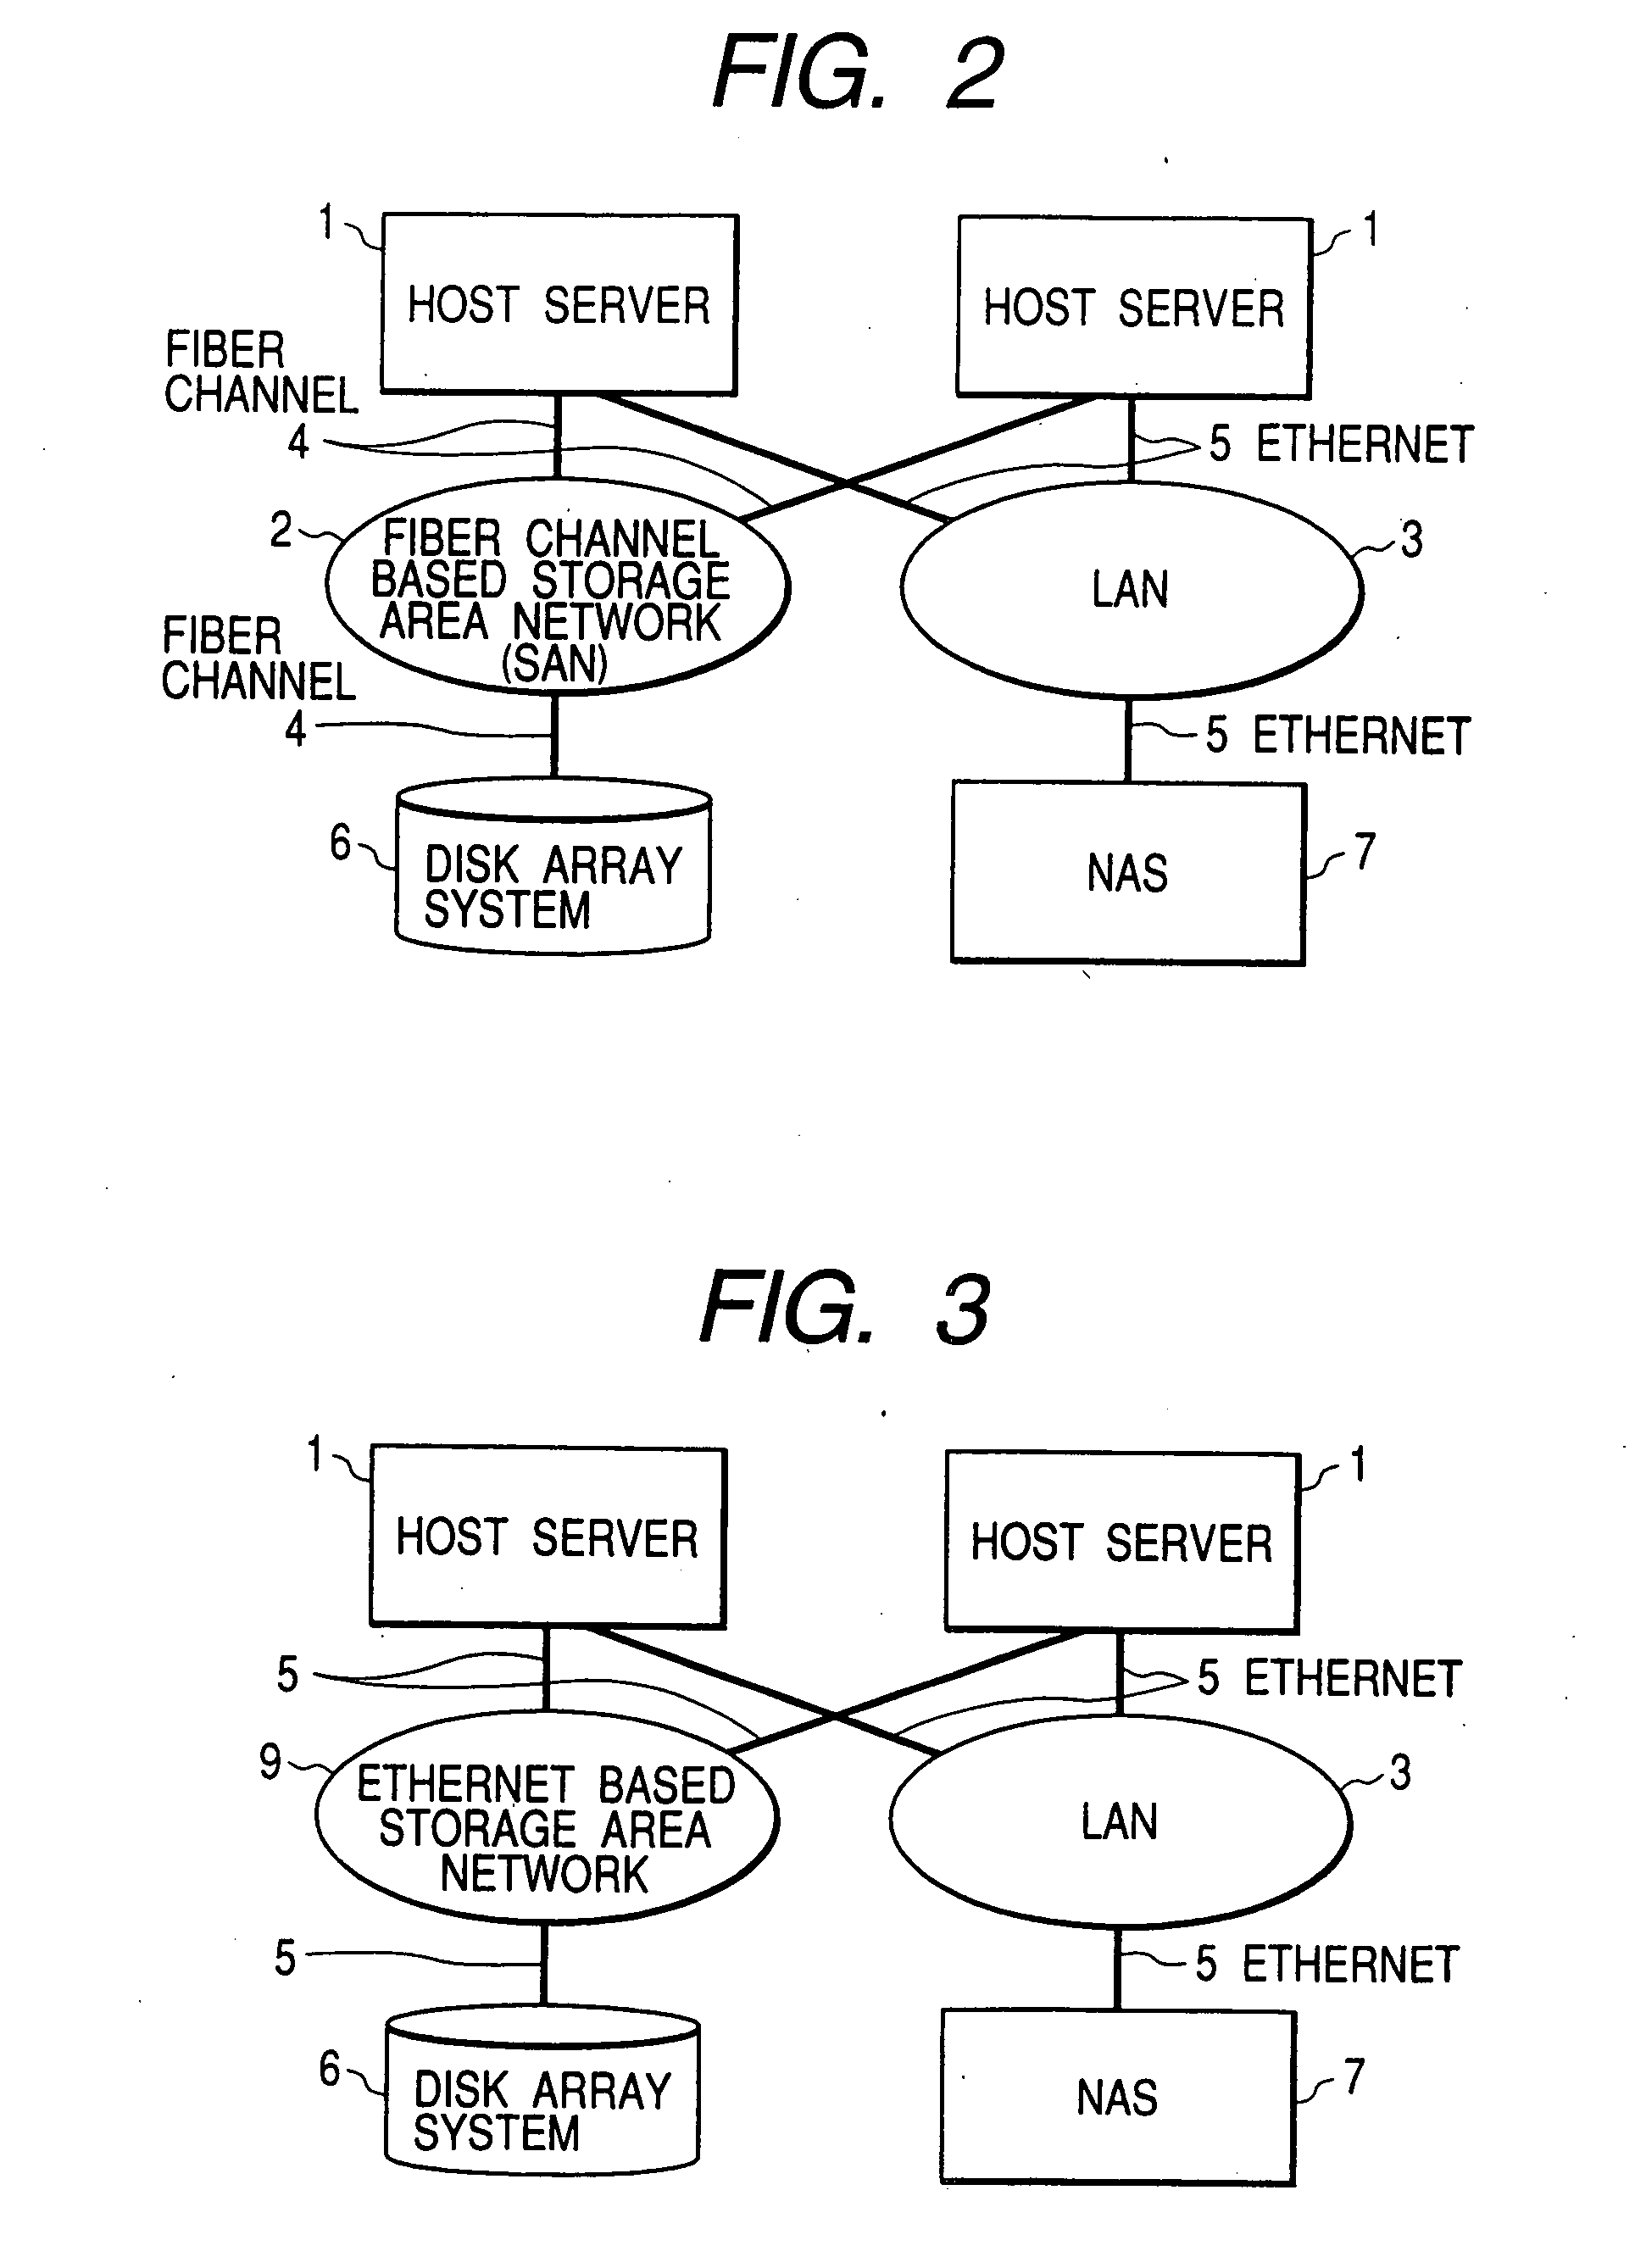 Storage system, a method of file data back up and a method of copying of file data